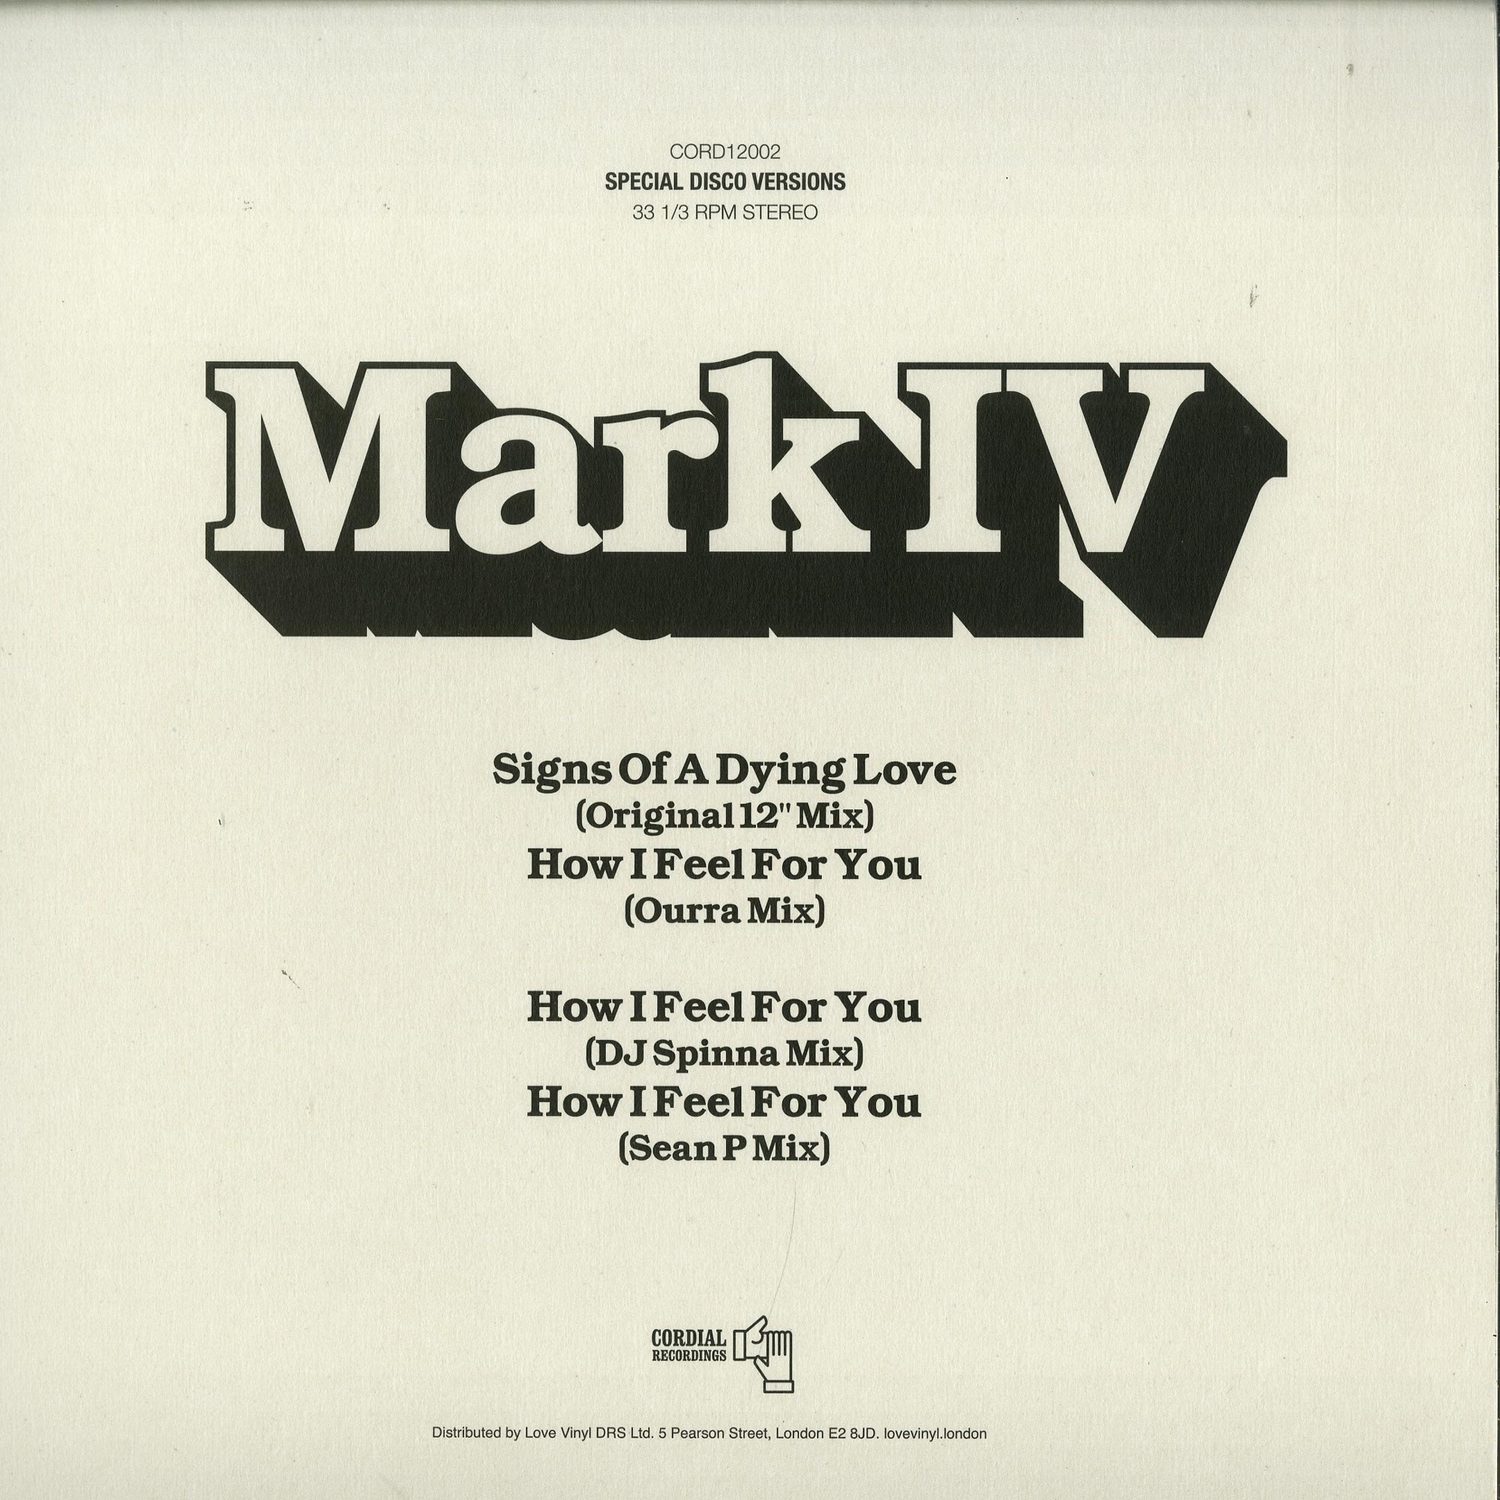 Mark IV - SIGNS OF A DYING LOVE